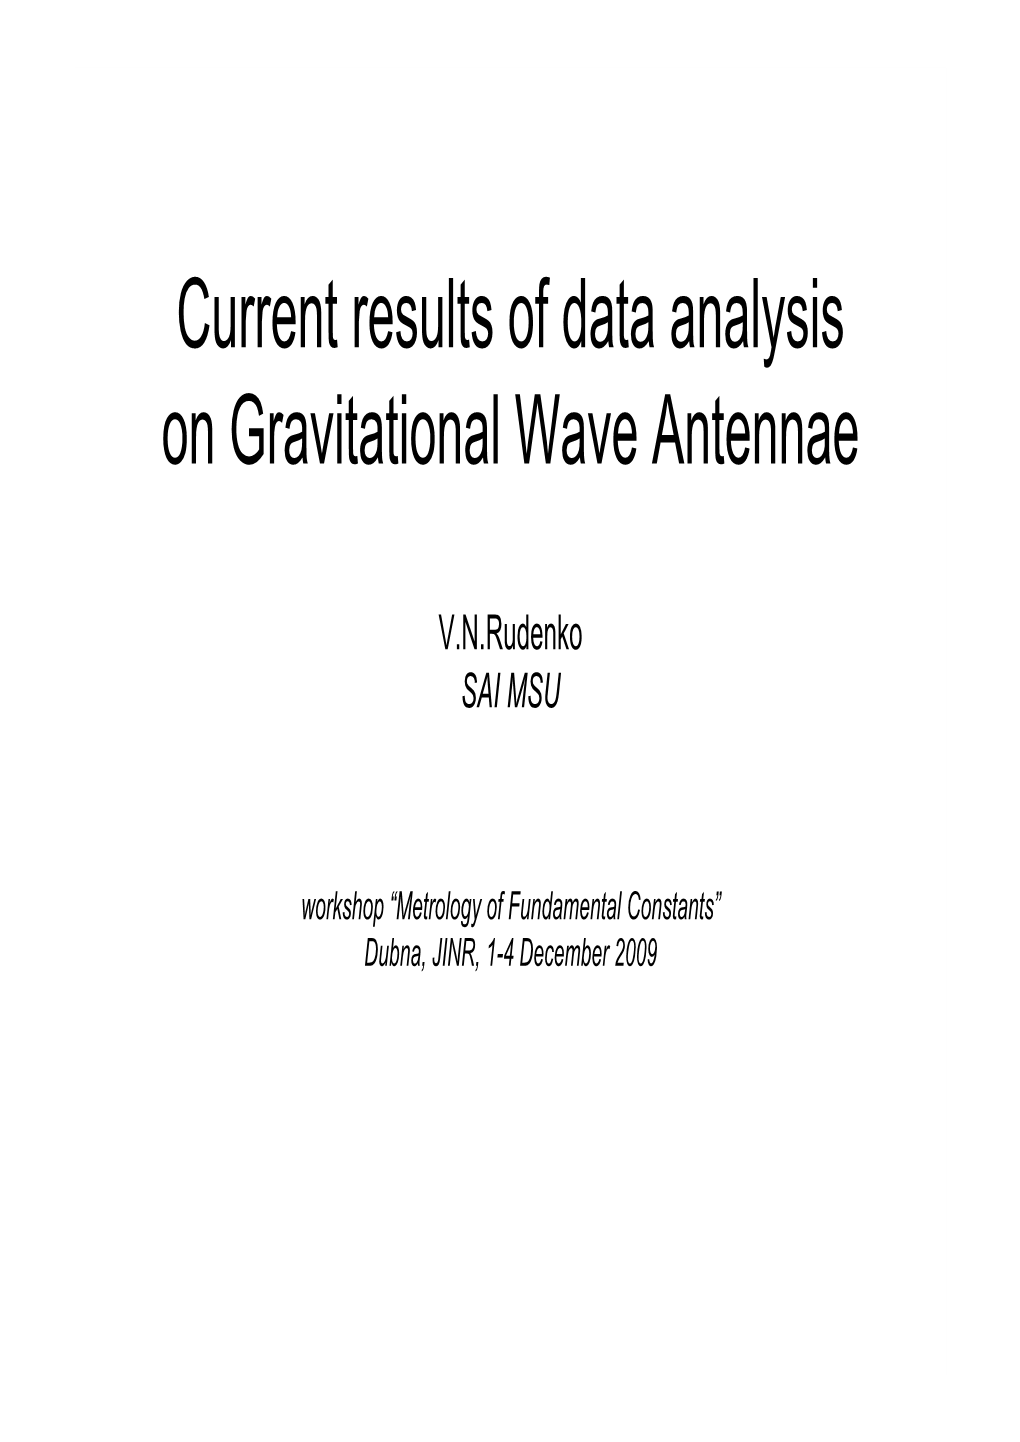 Current Results of Data Analysis on Gravitational Wave Antennae